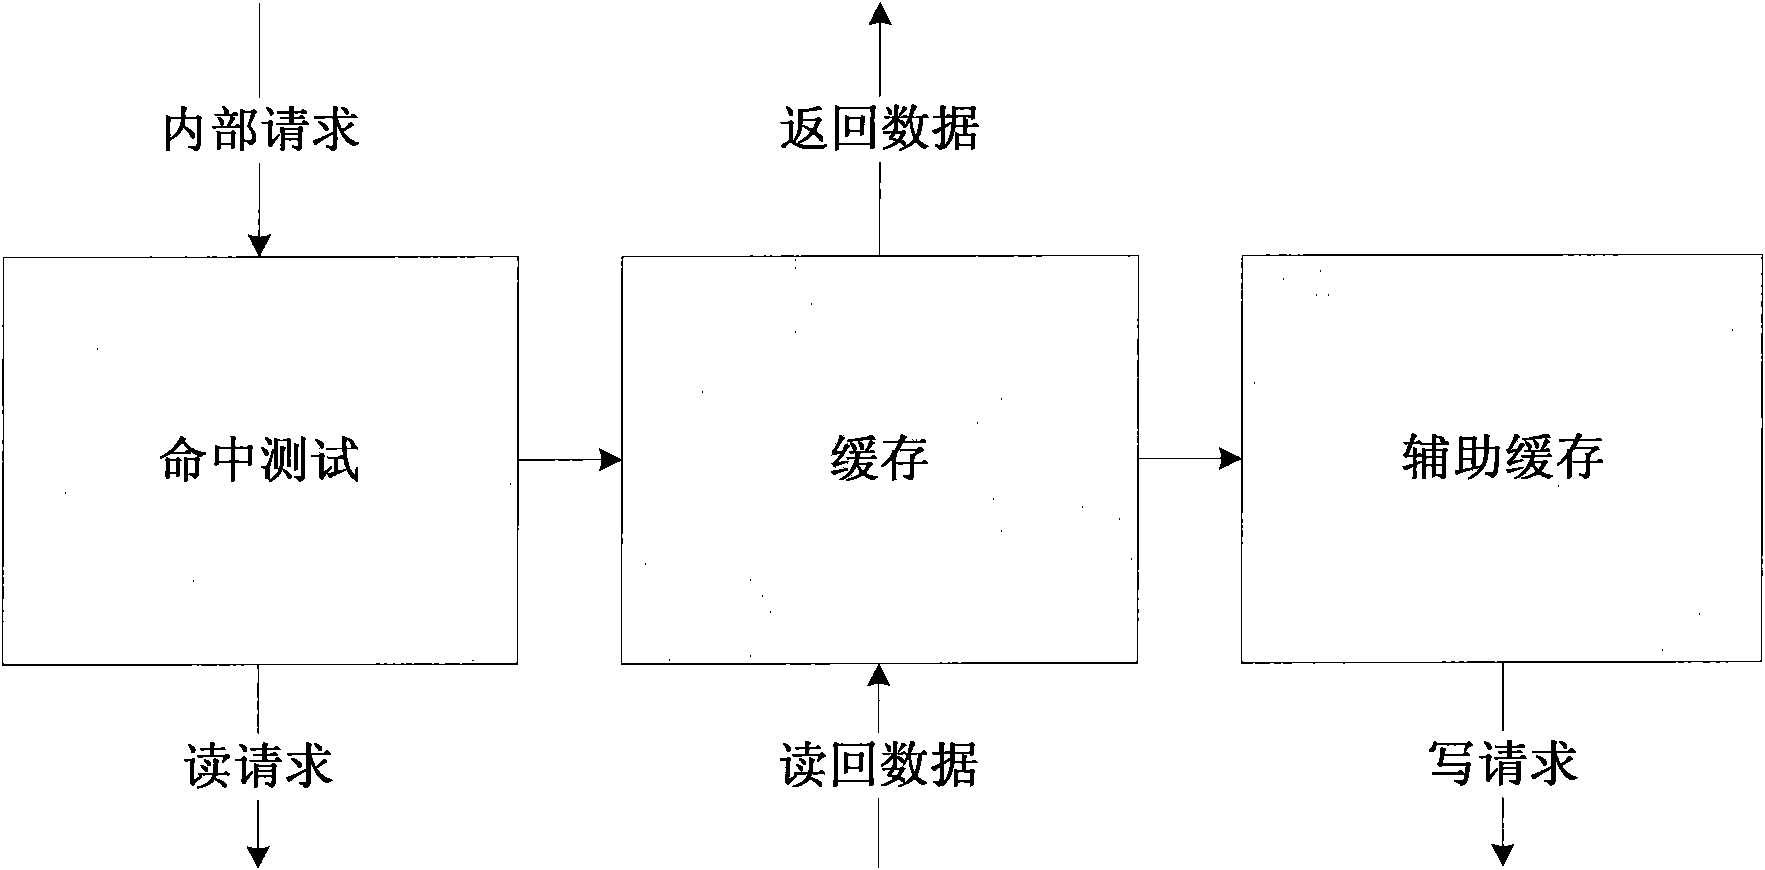 Method for replacing cache